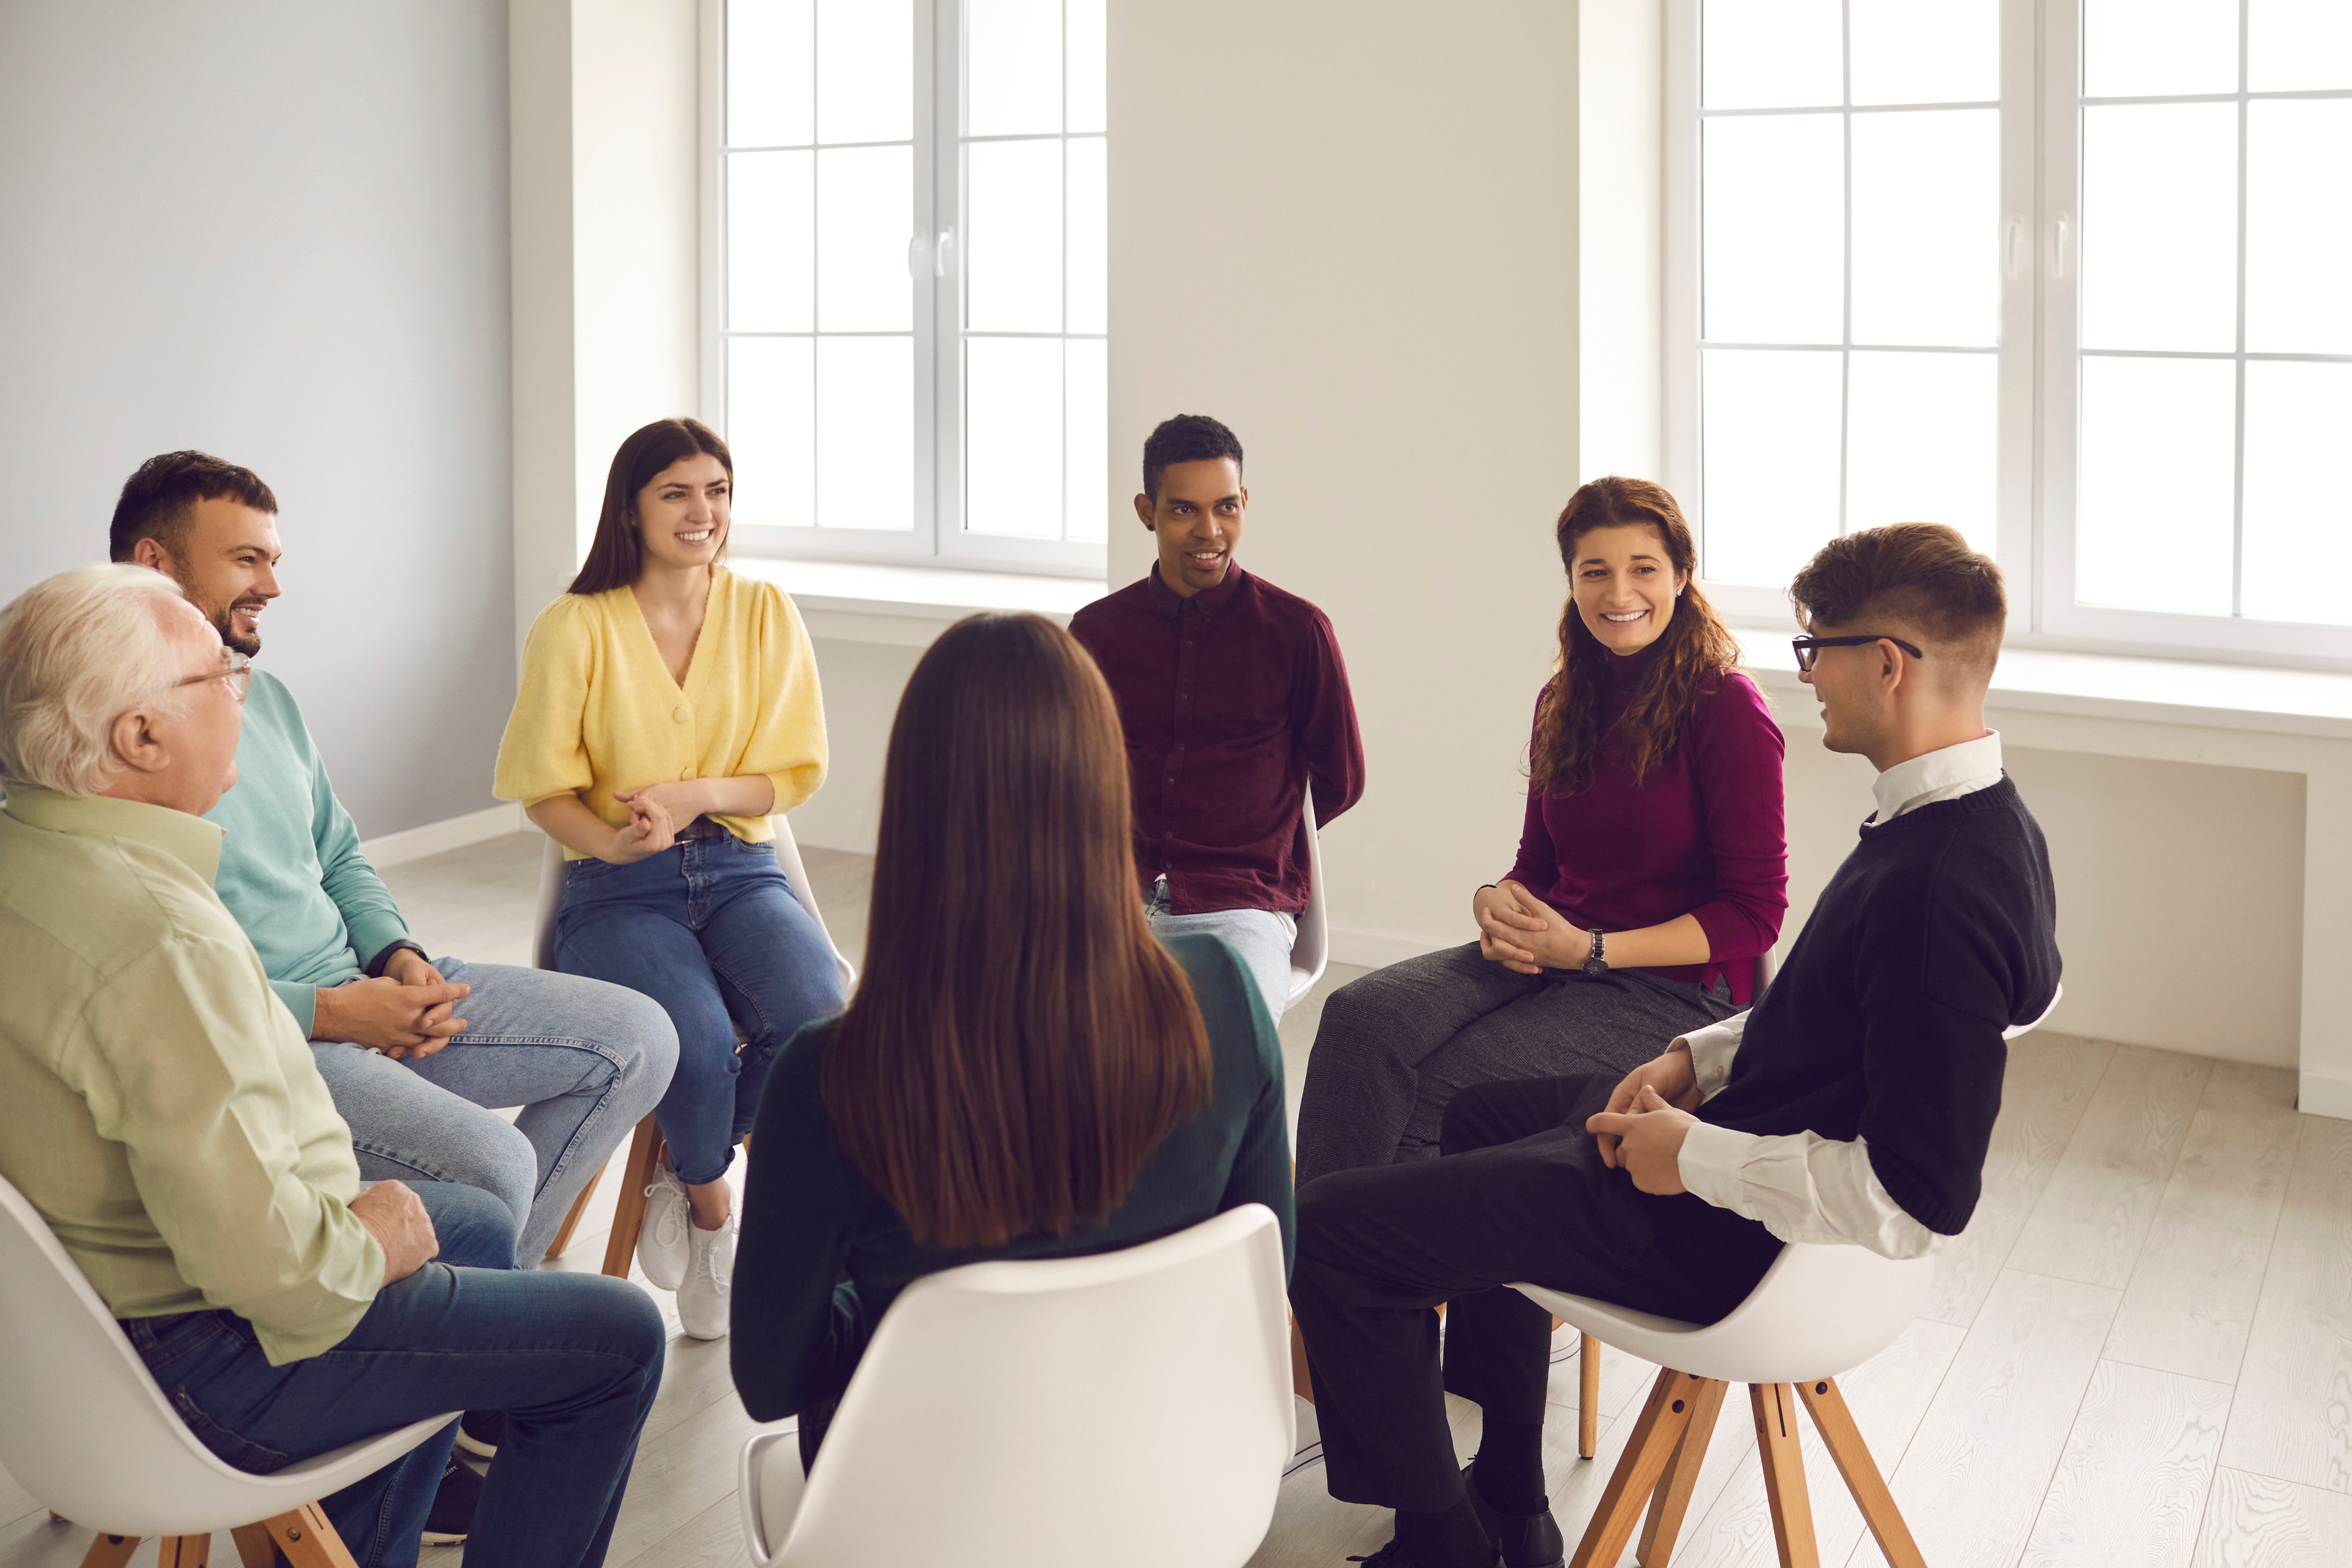 Getting psychological help in a friendly atmosphere. Happy smiling diverse people sitting in circle and listening to young man talking about his concerns and sharing opinion in a group therapy session